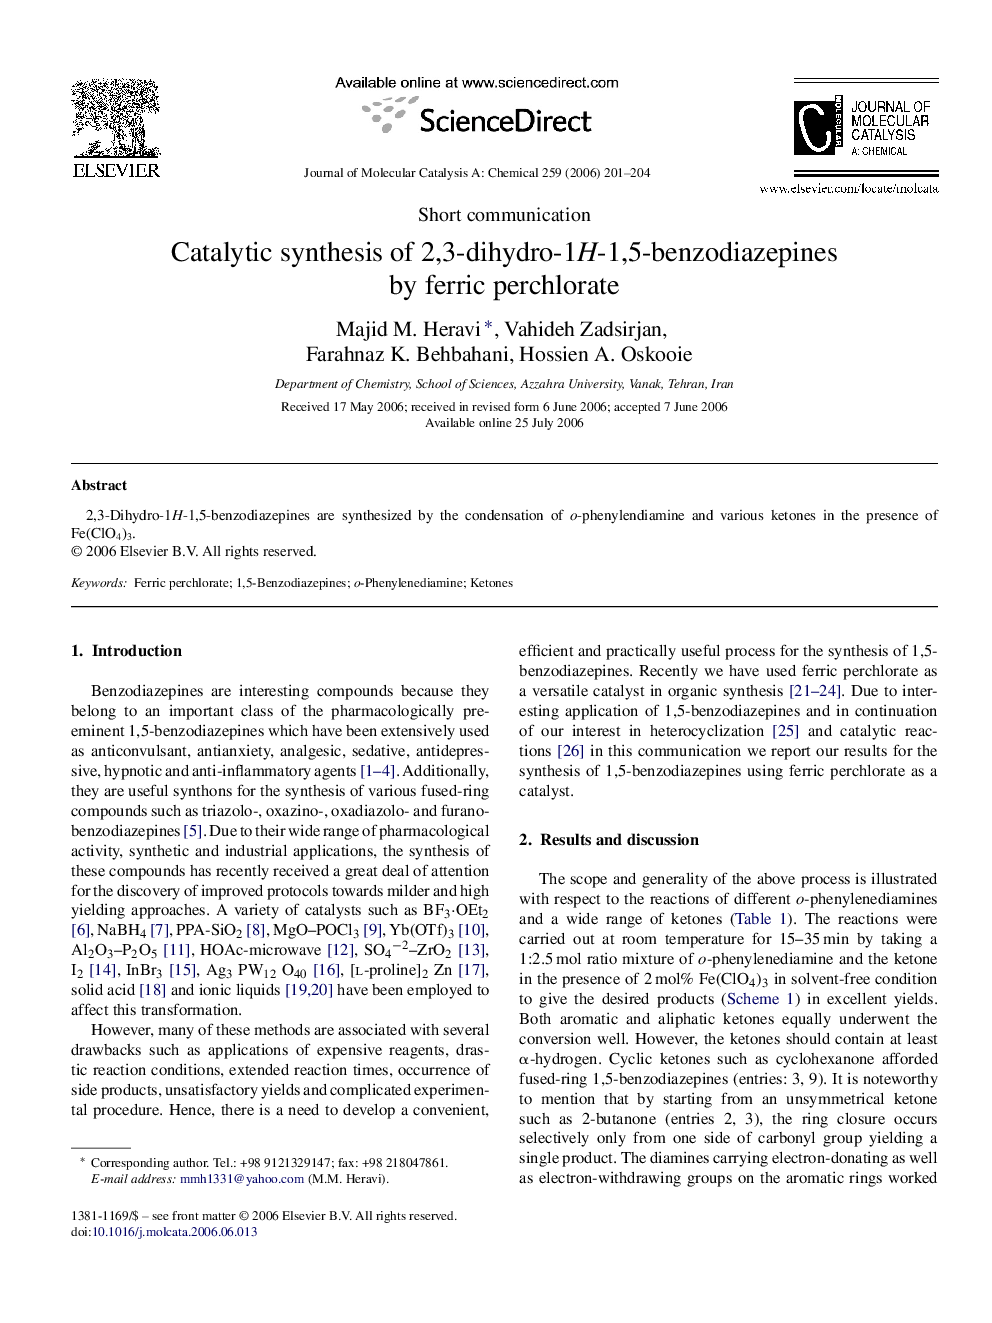 Catalytic synthesis of 2,3-dihydro-1H-1,5-benzodiazepines by ferric perchlorate